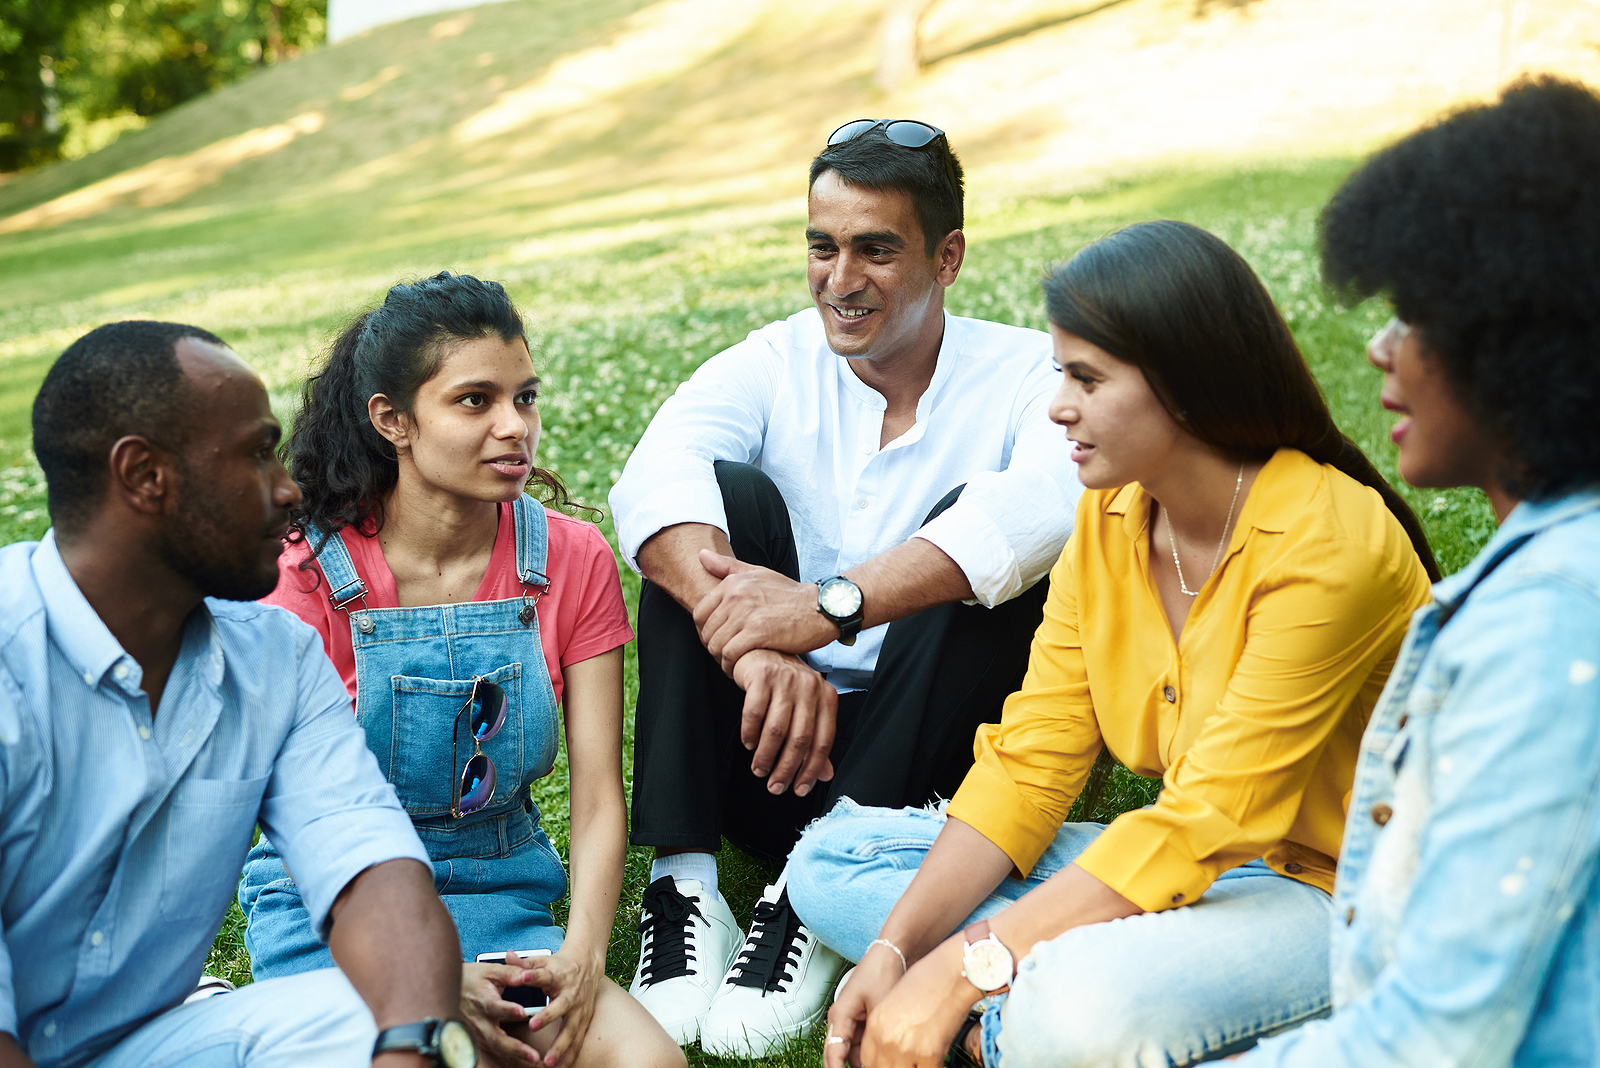 A group of mixed ethnicities and attractive friends chatting while sitting in the park on the grass wearing spring clothing.